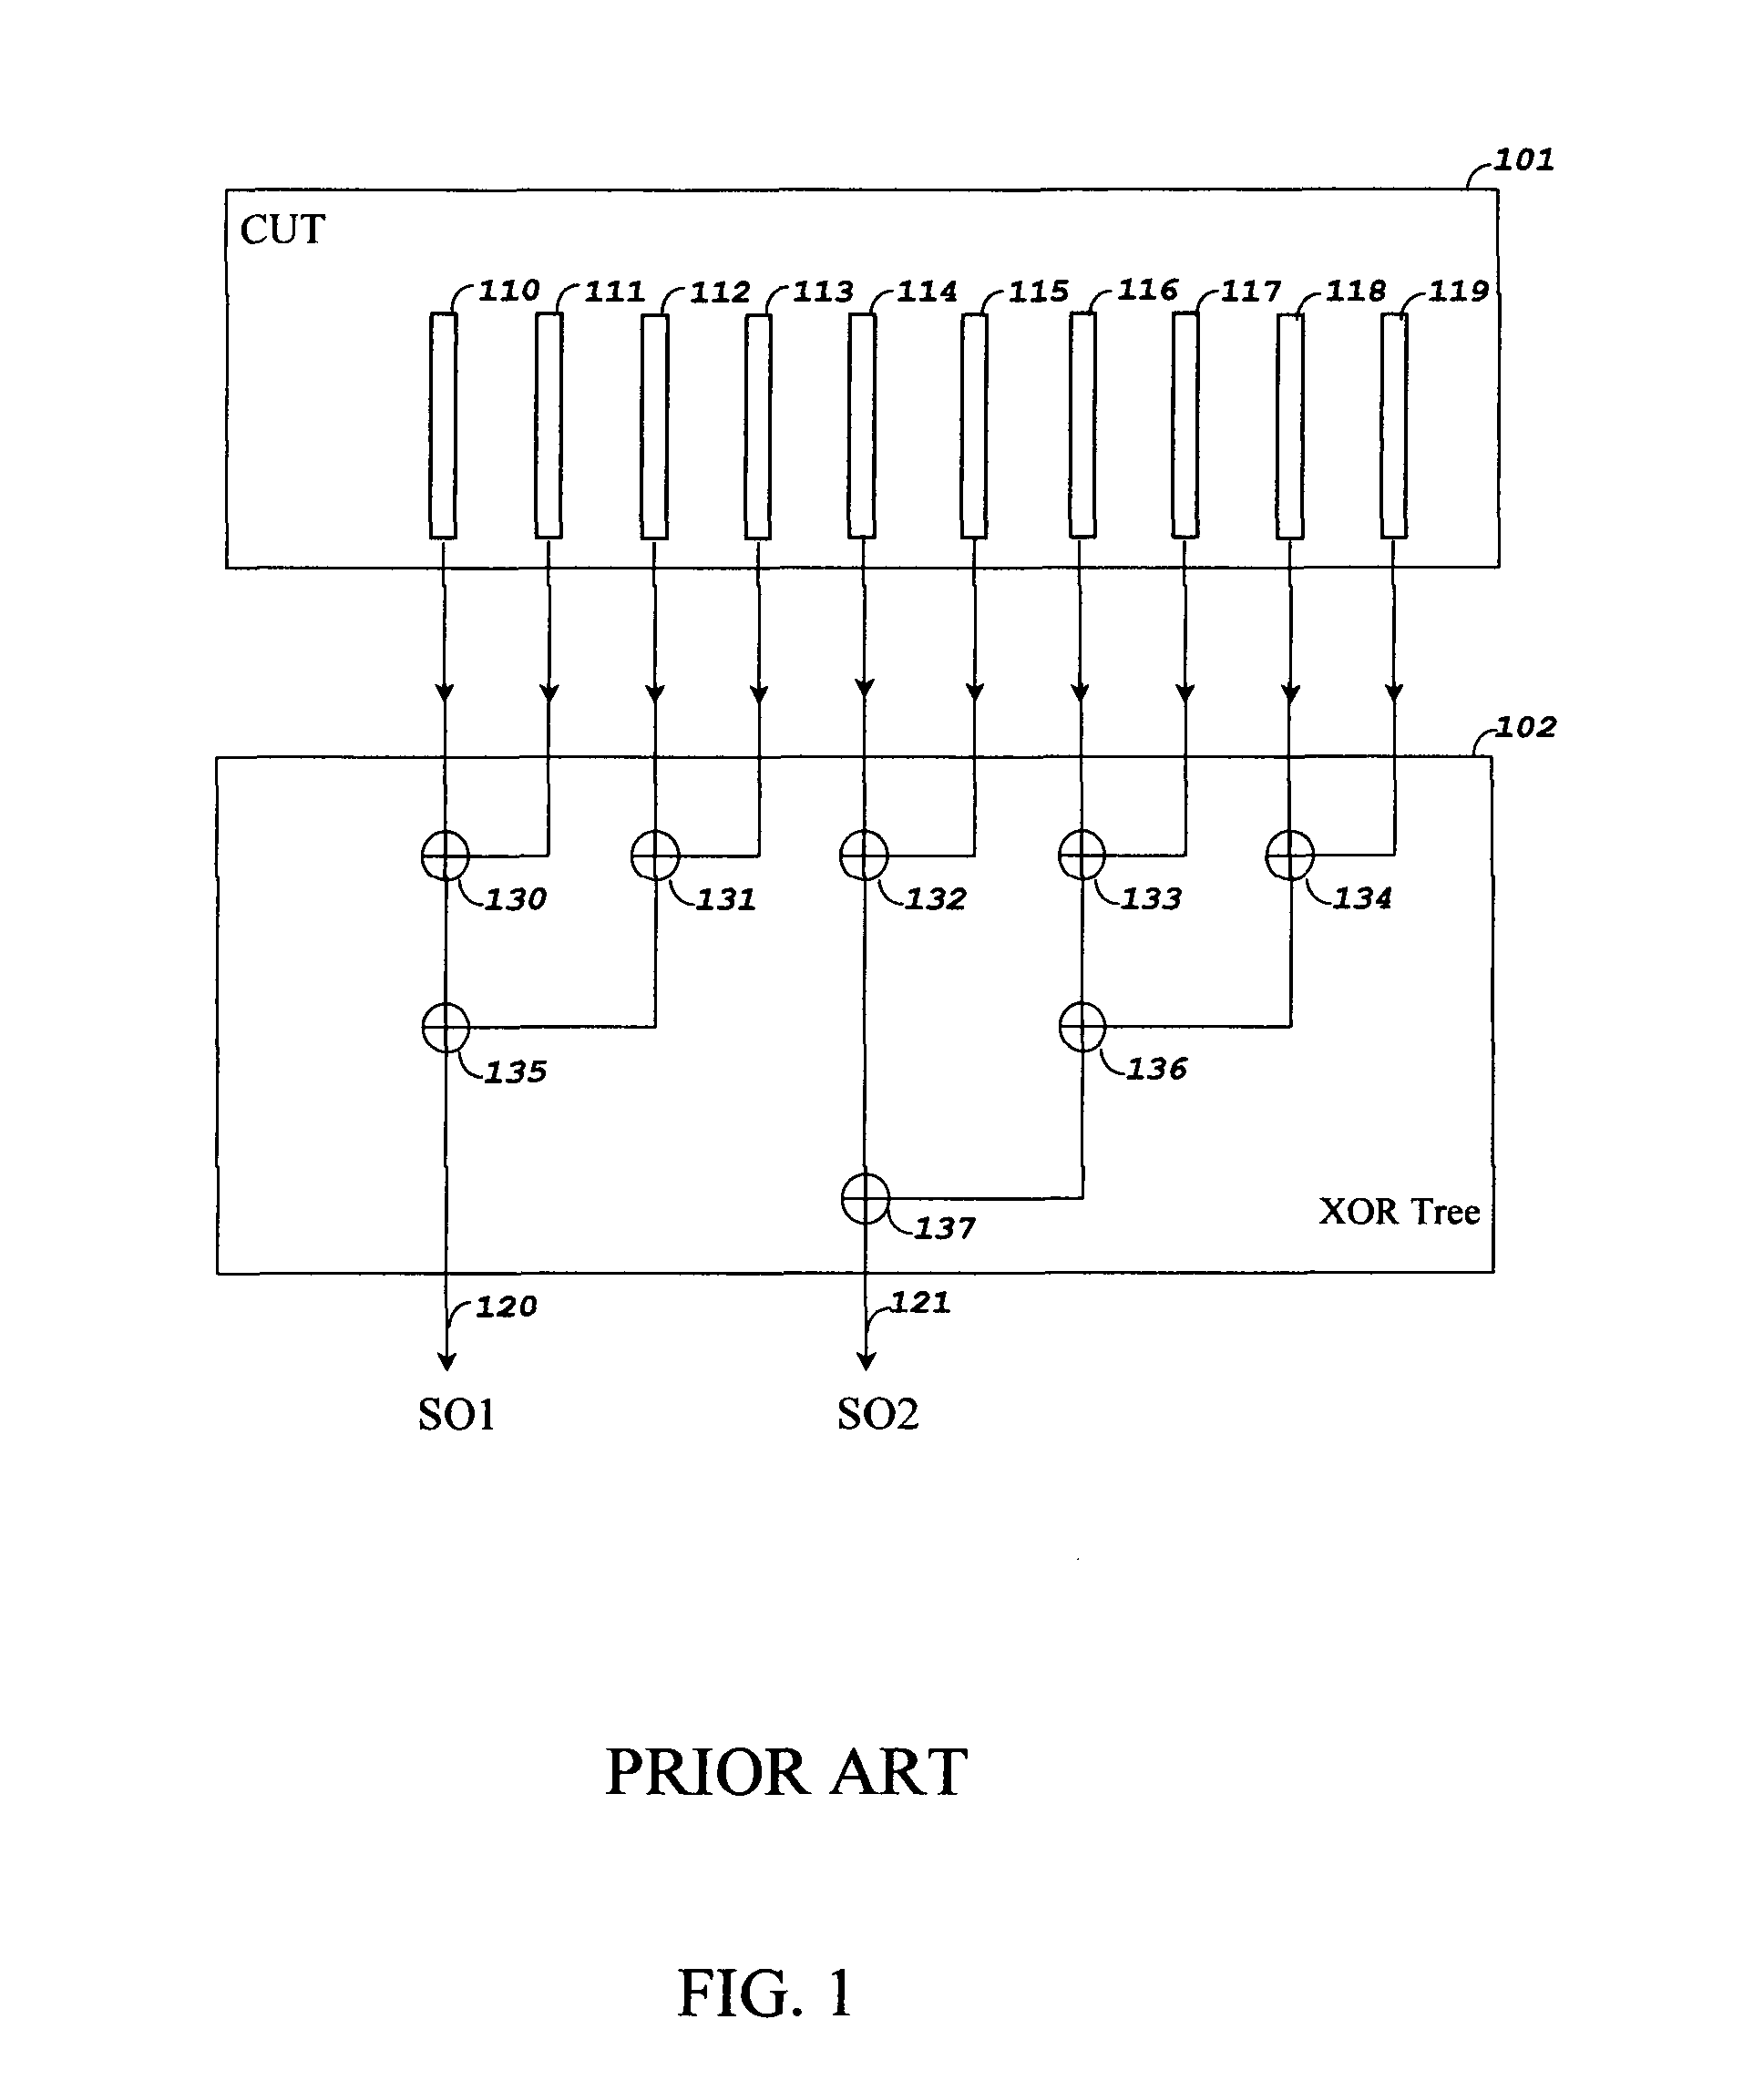 X-canceling multiple-input signature register (MISR) for compacting output responses with unknowns